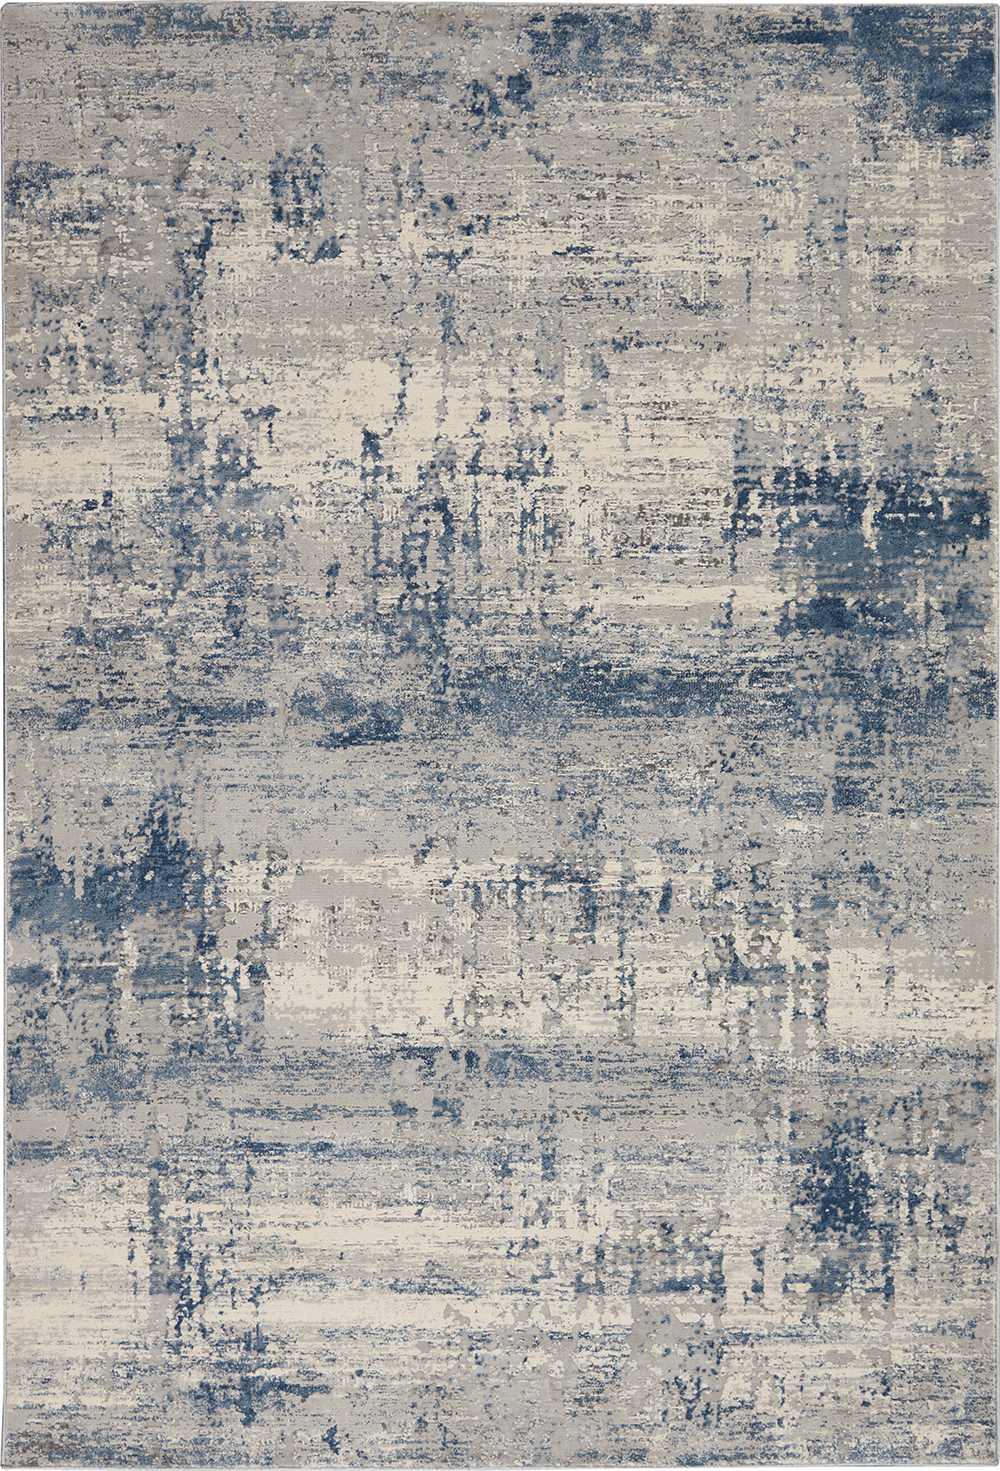 Nourison Rugs - Rustic Textures Rectanglular RUS10 Rug in Ivory / Blue - 2.2m x 1.6m